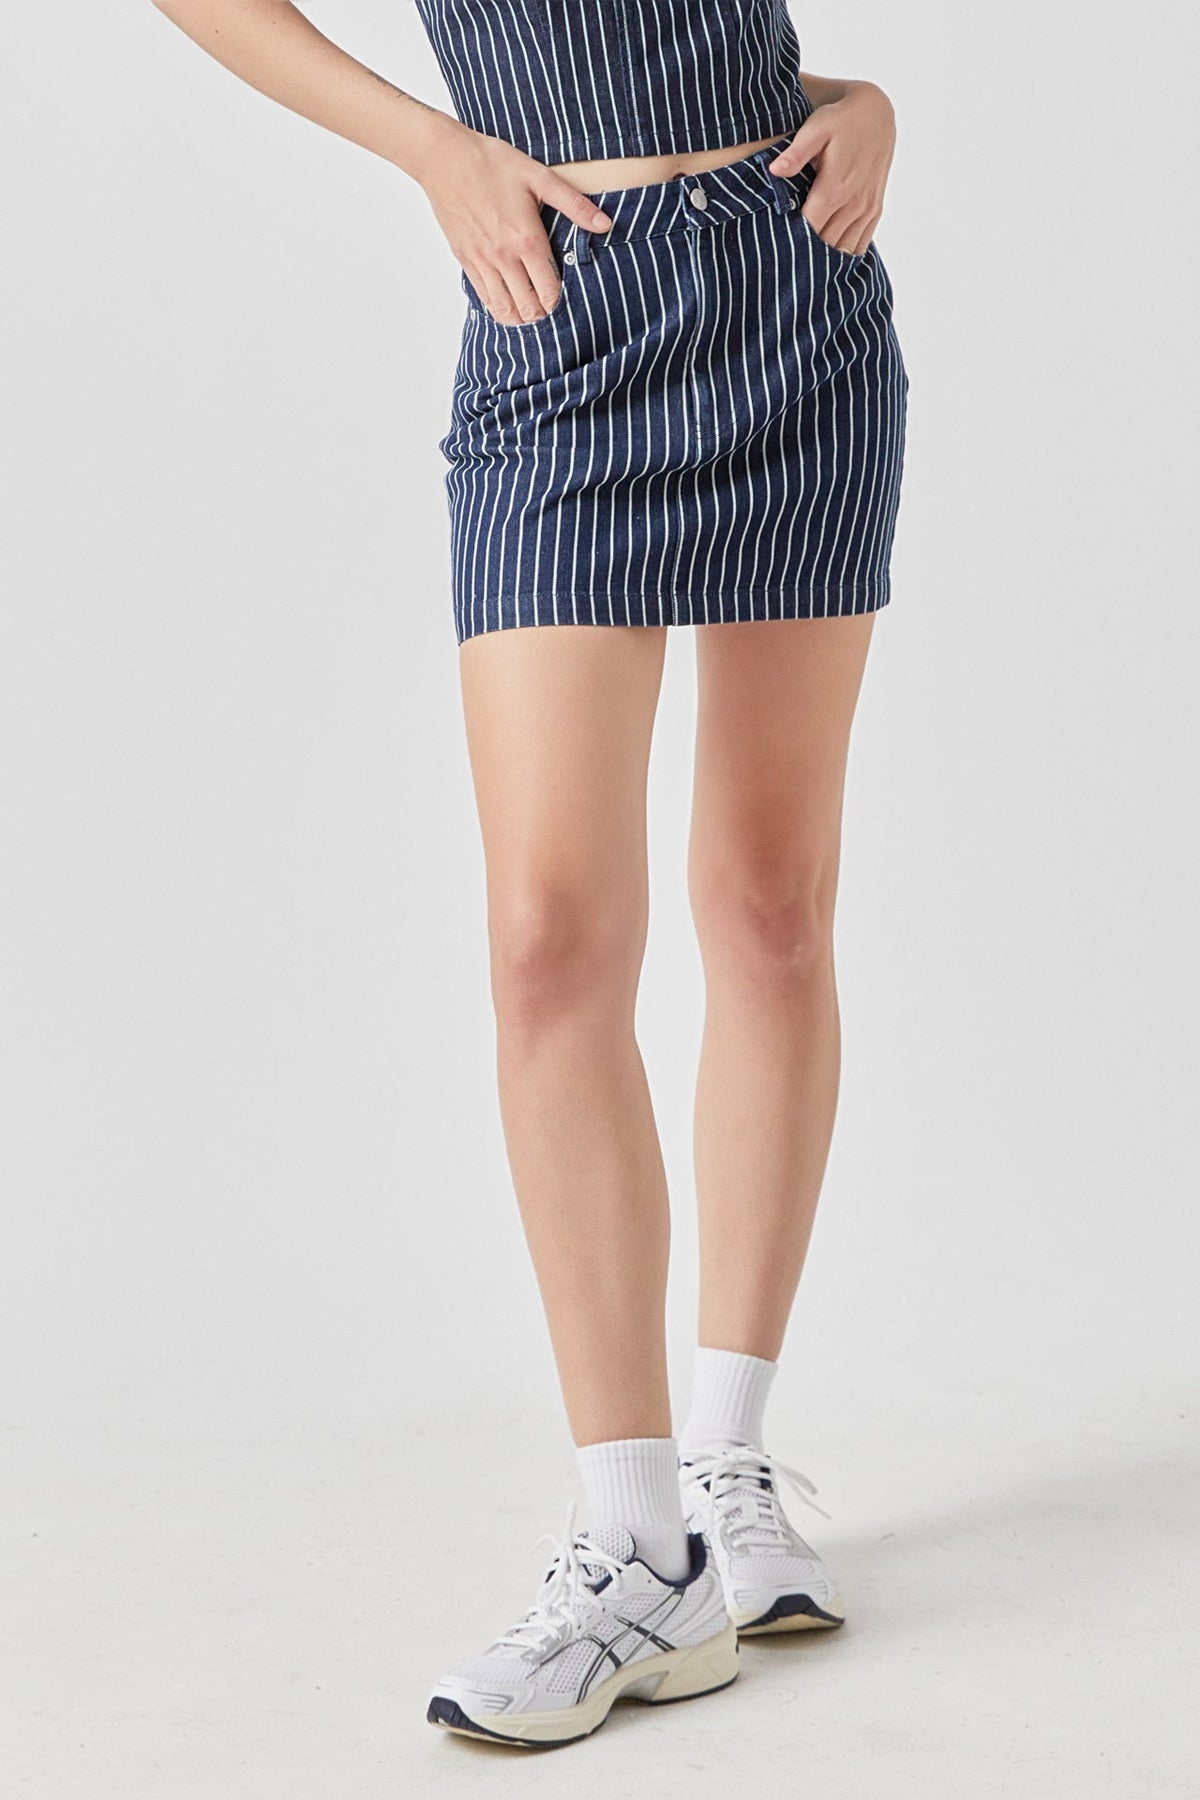 GREY LAB - Pin Striped Denim Mini SKirt - SKIRTS available at Objectrare